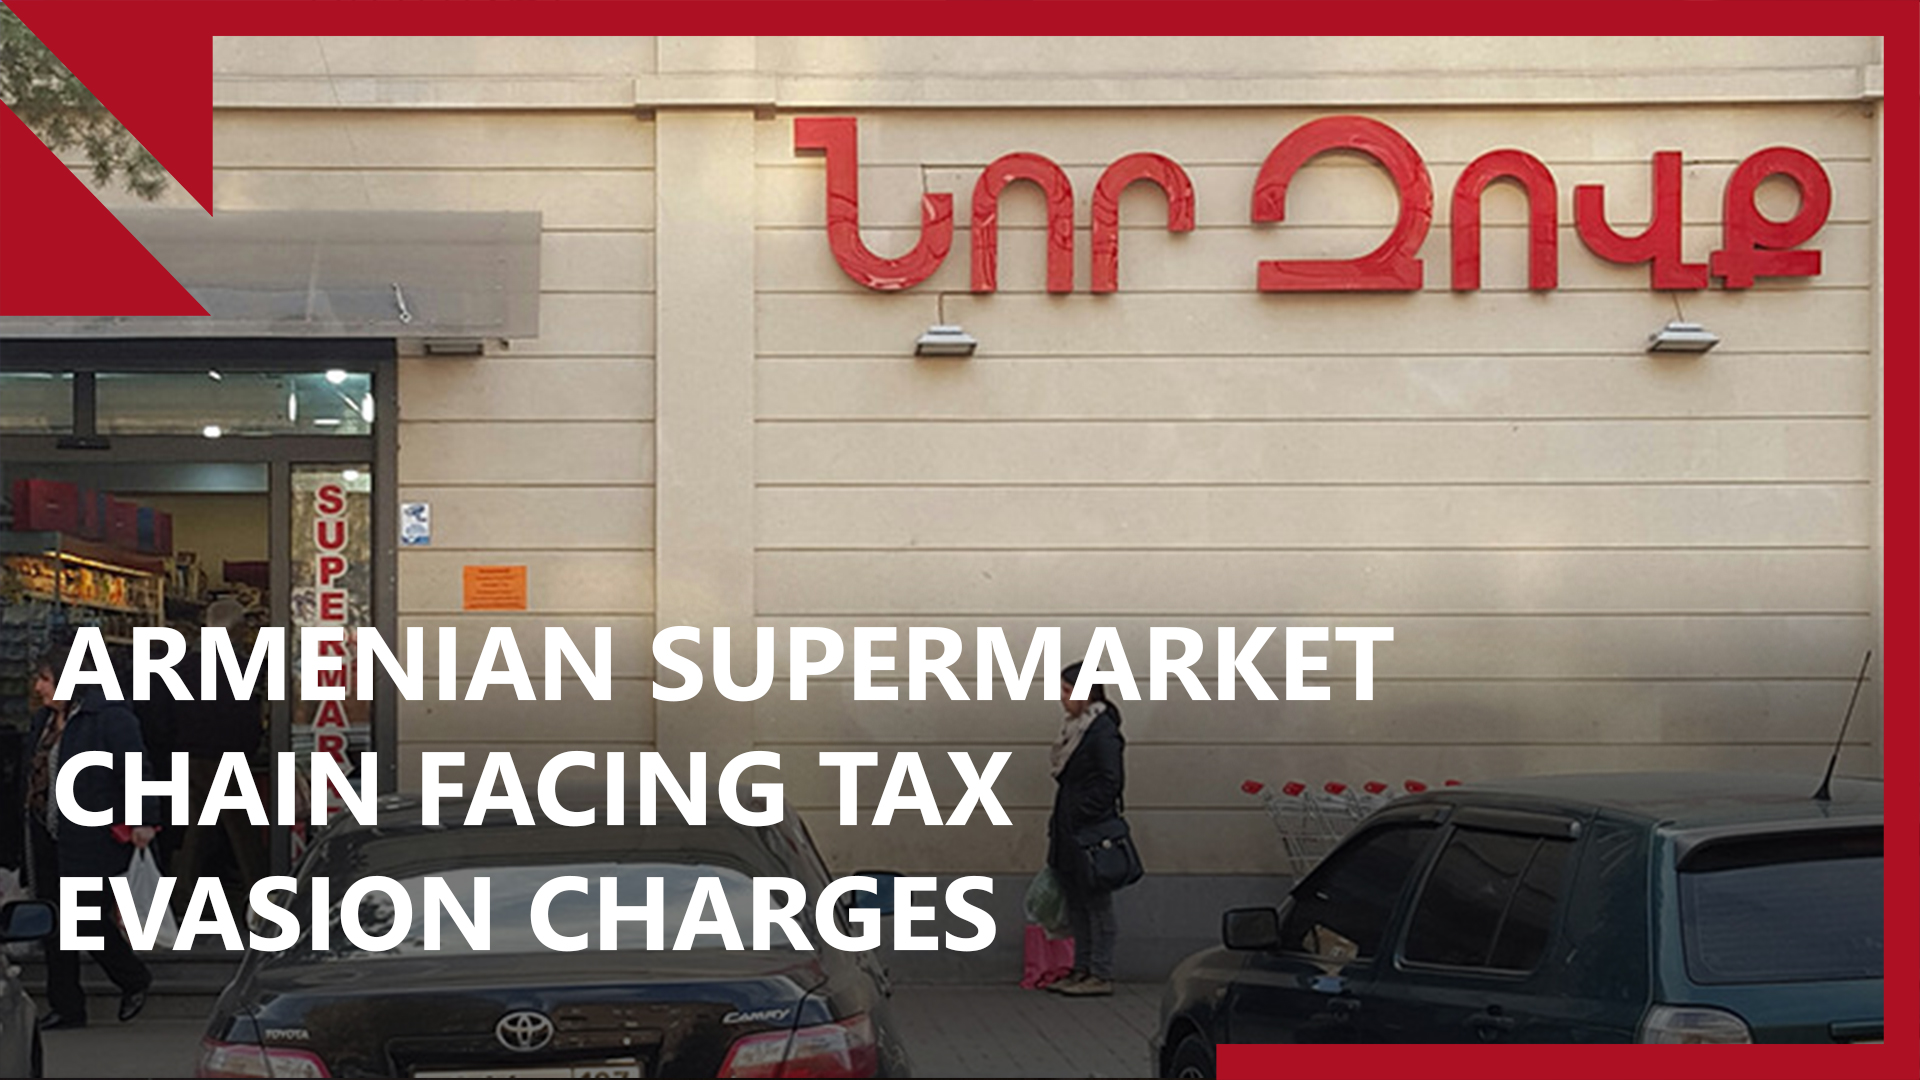 Armenian-supermarket-chain-facing-tax-evasion-charges